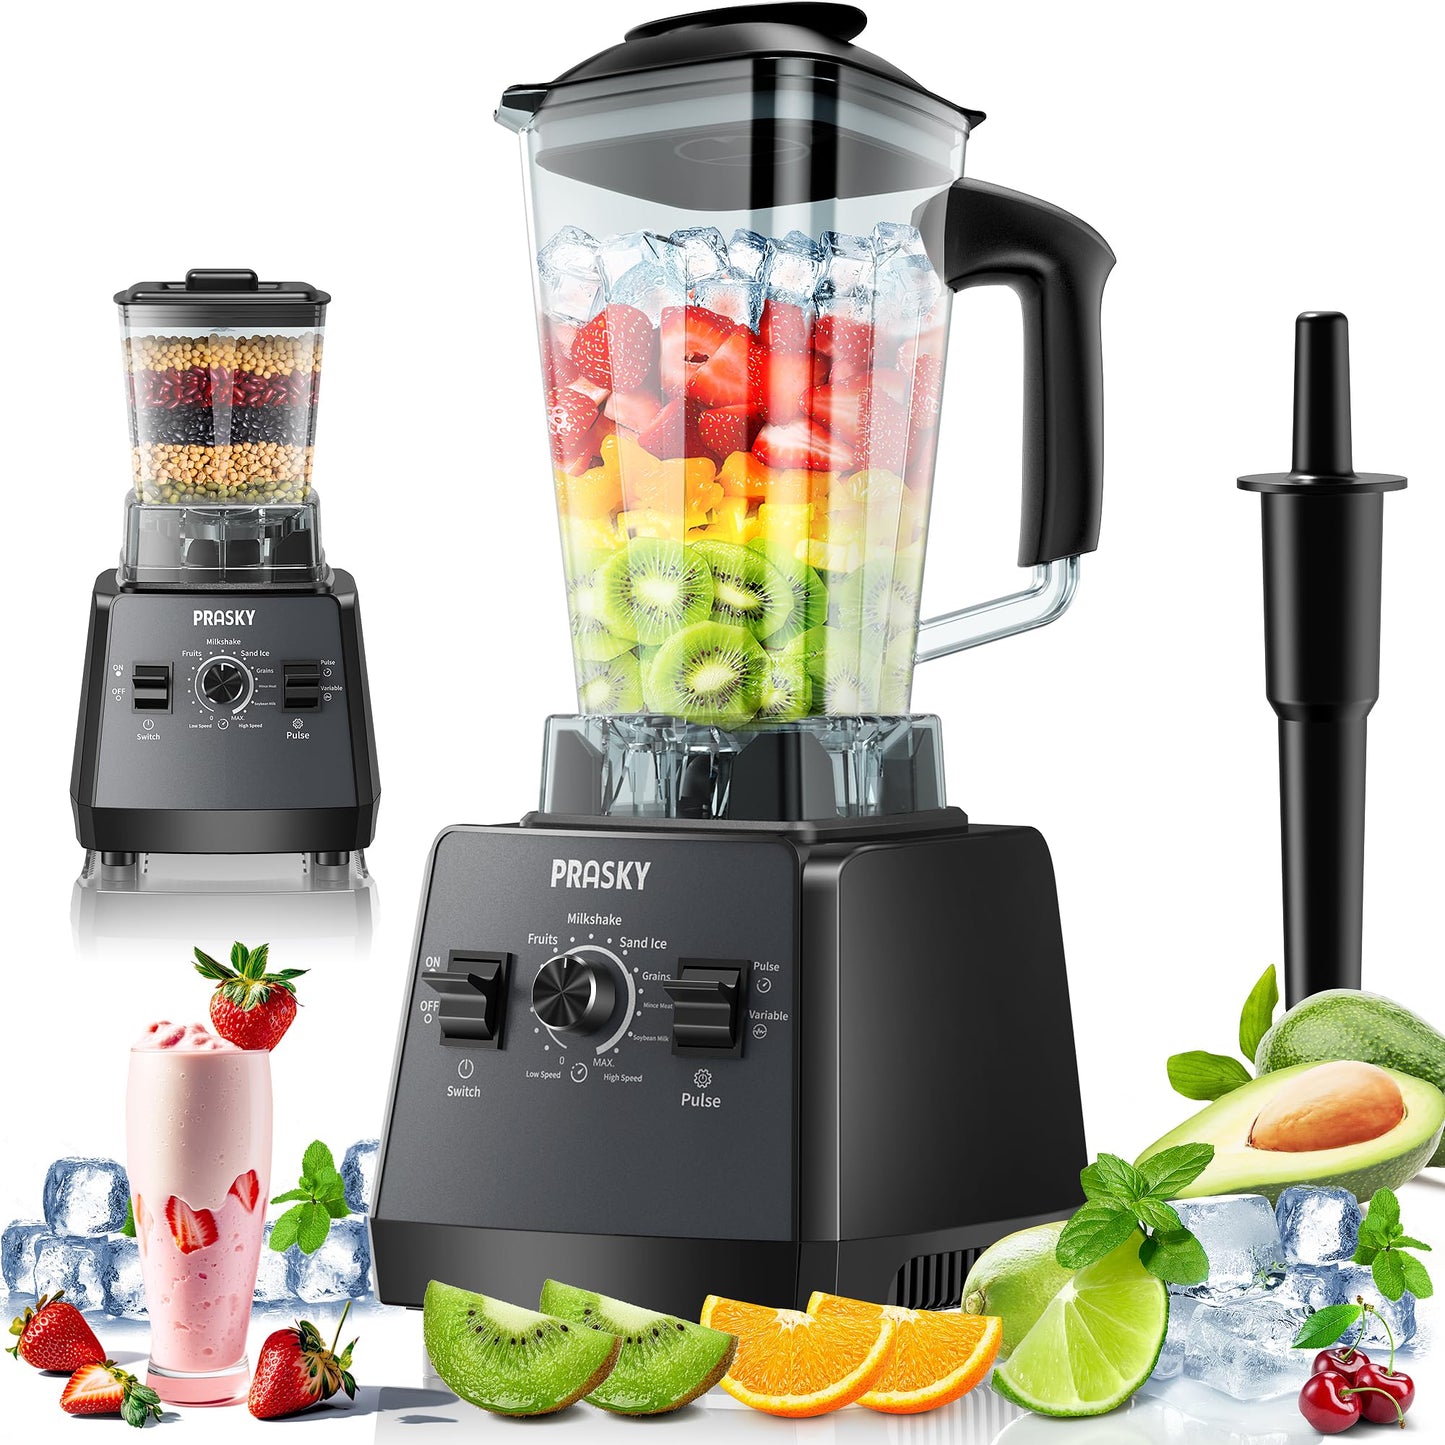 Professional Blender, Smoothies Blender, PRASKY 2400W Blender and Grinder Combo 25000RPM Powerful Blenders Kitchen 68oz BPA Free 2 Containers Countertop Blenders Ice, Grinding, Juice, Shakes